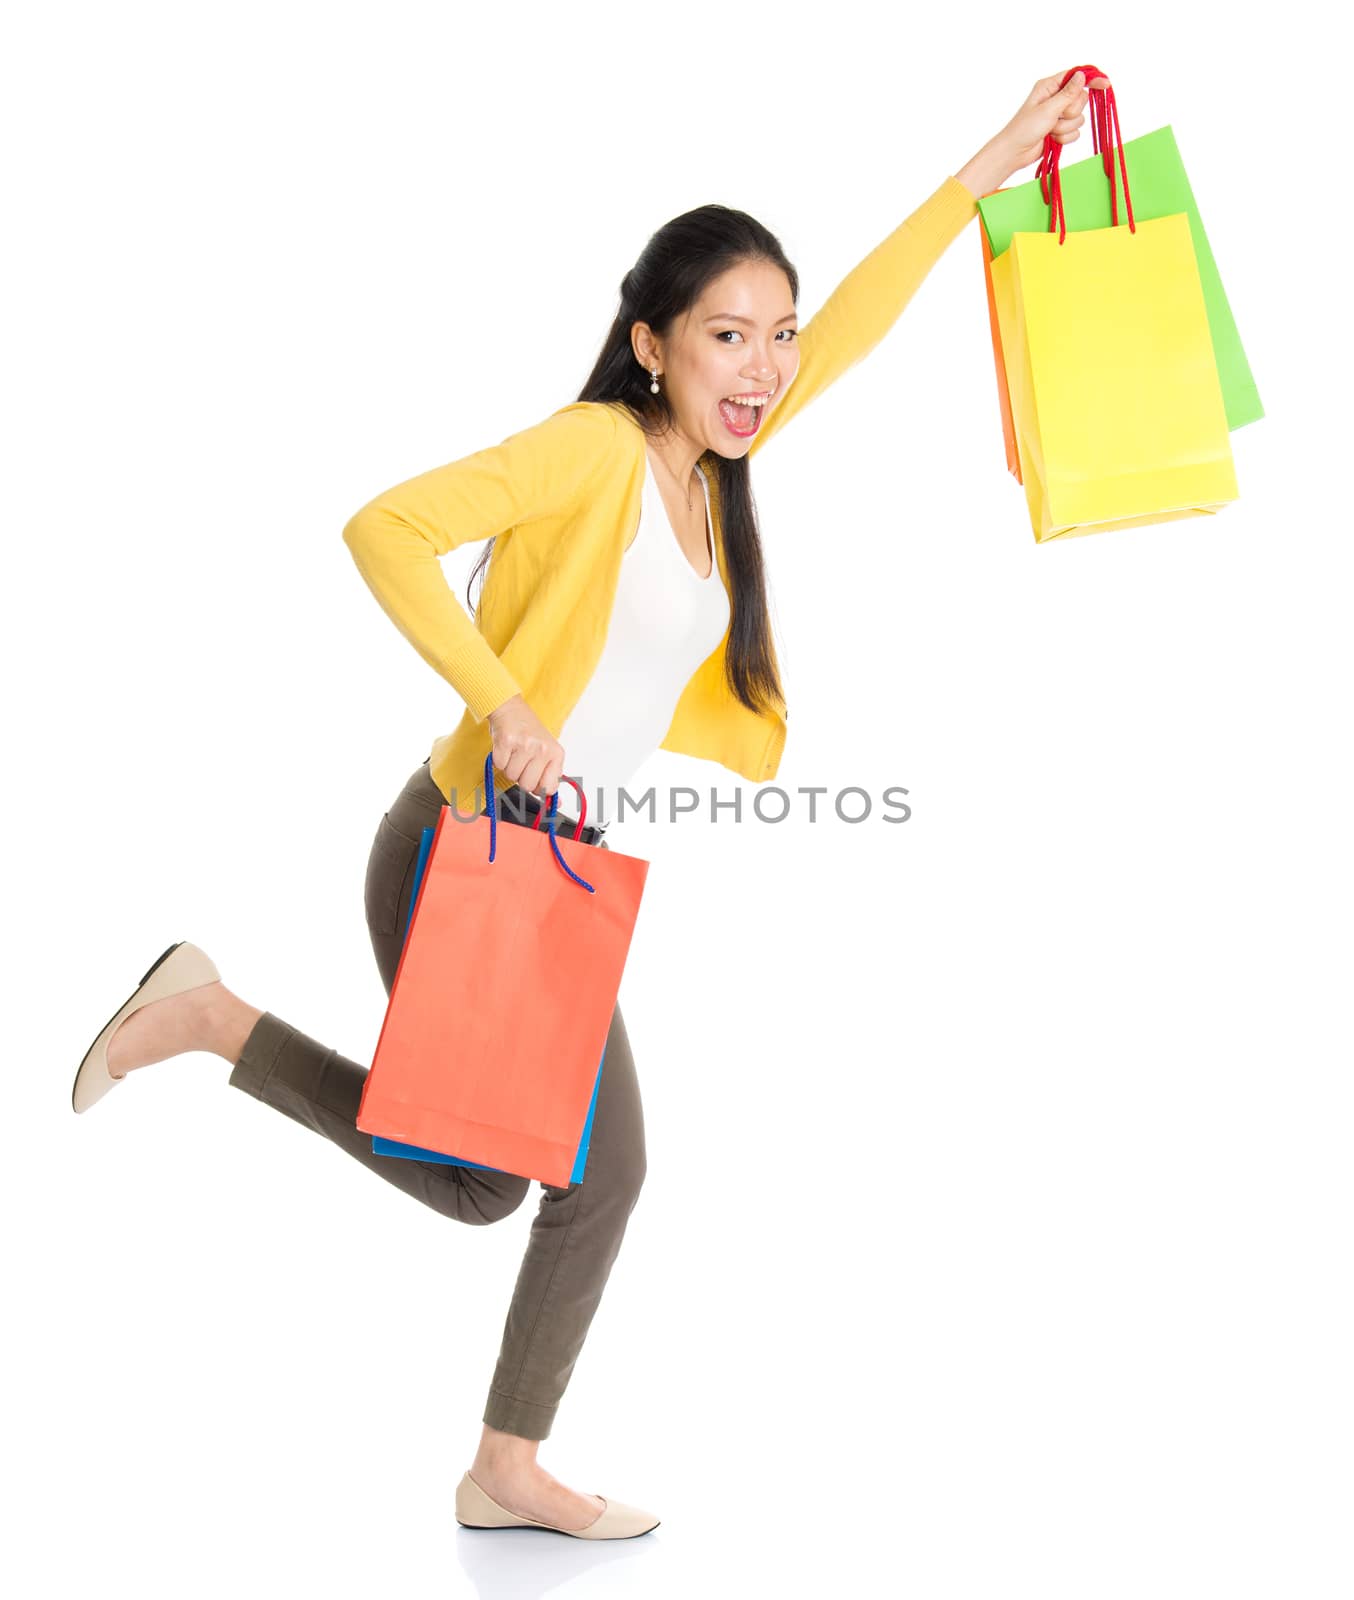 Happy young Asian female shopper running, hands outstretched holding shopping bags and smiling, full length isolated standing on white background.